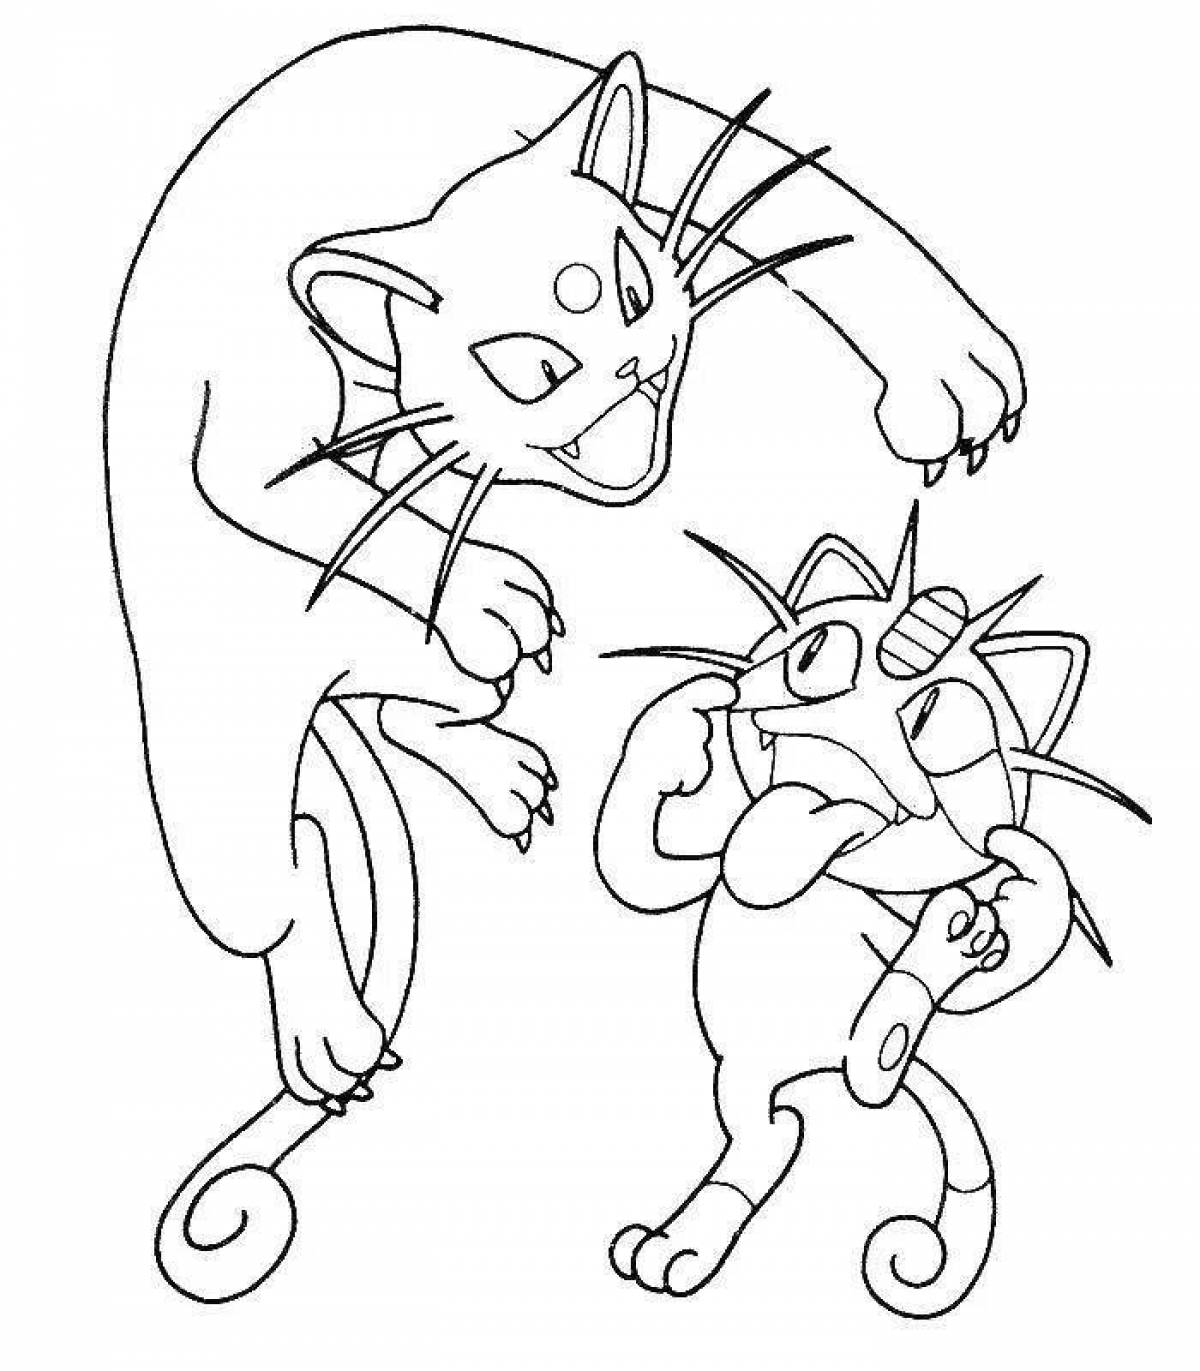 Awesome chooch meow coloring page